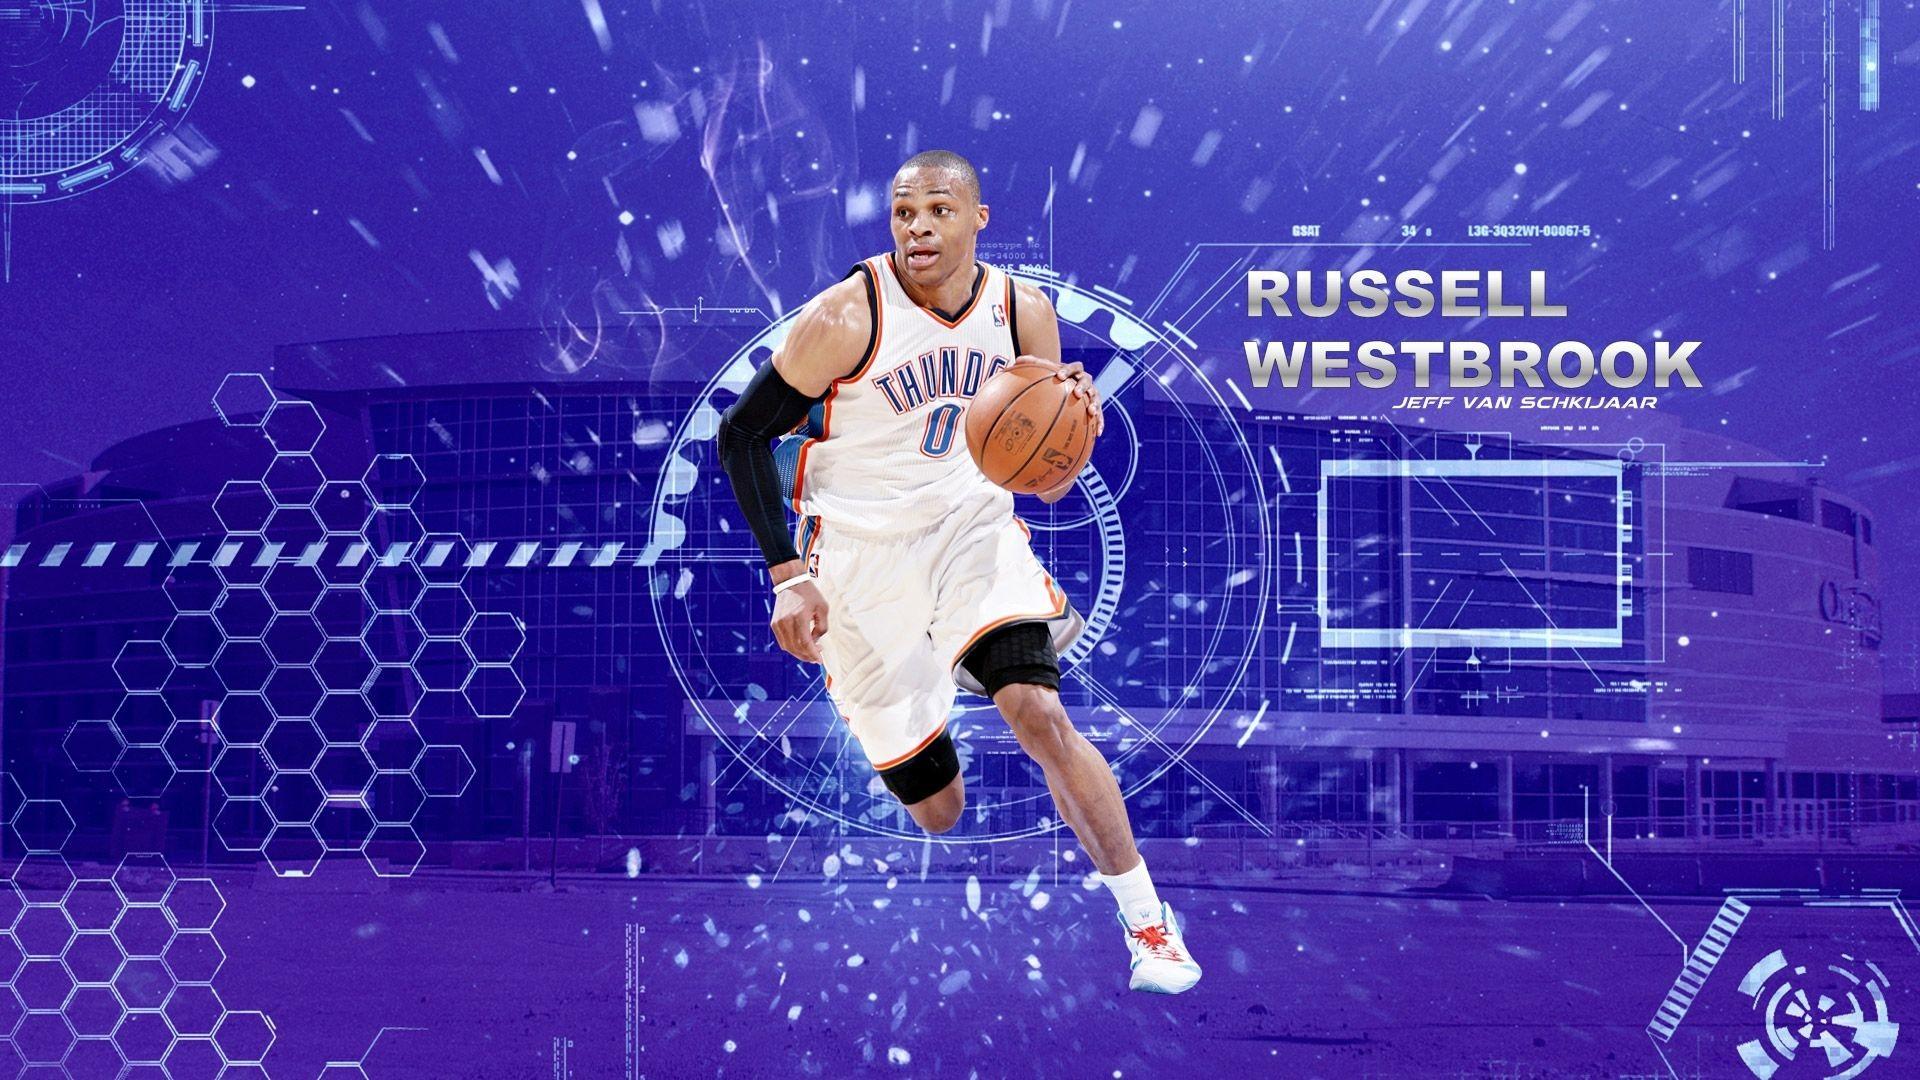 Russel Westbrook Wallpaper background picture